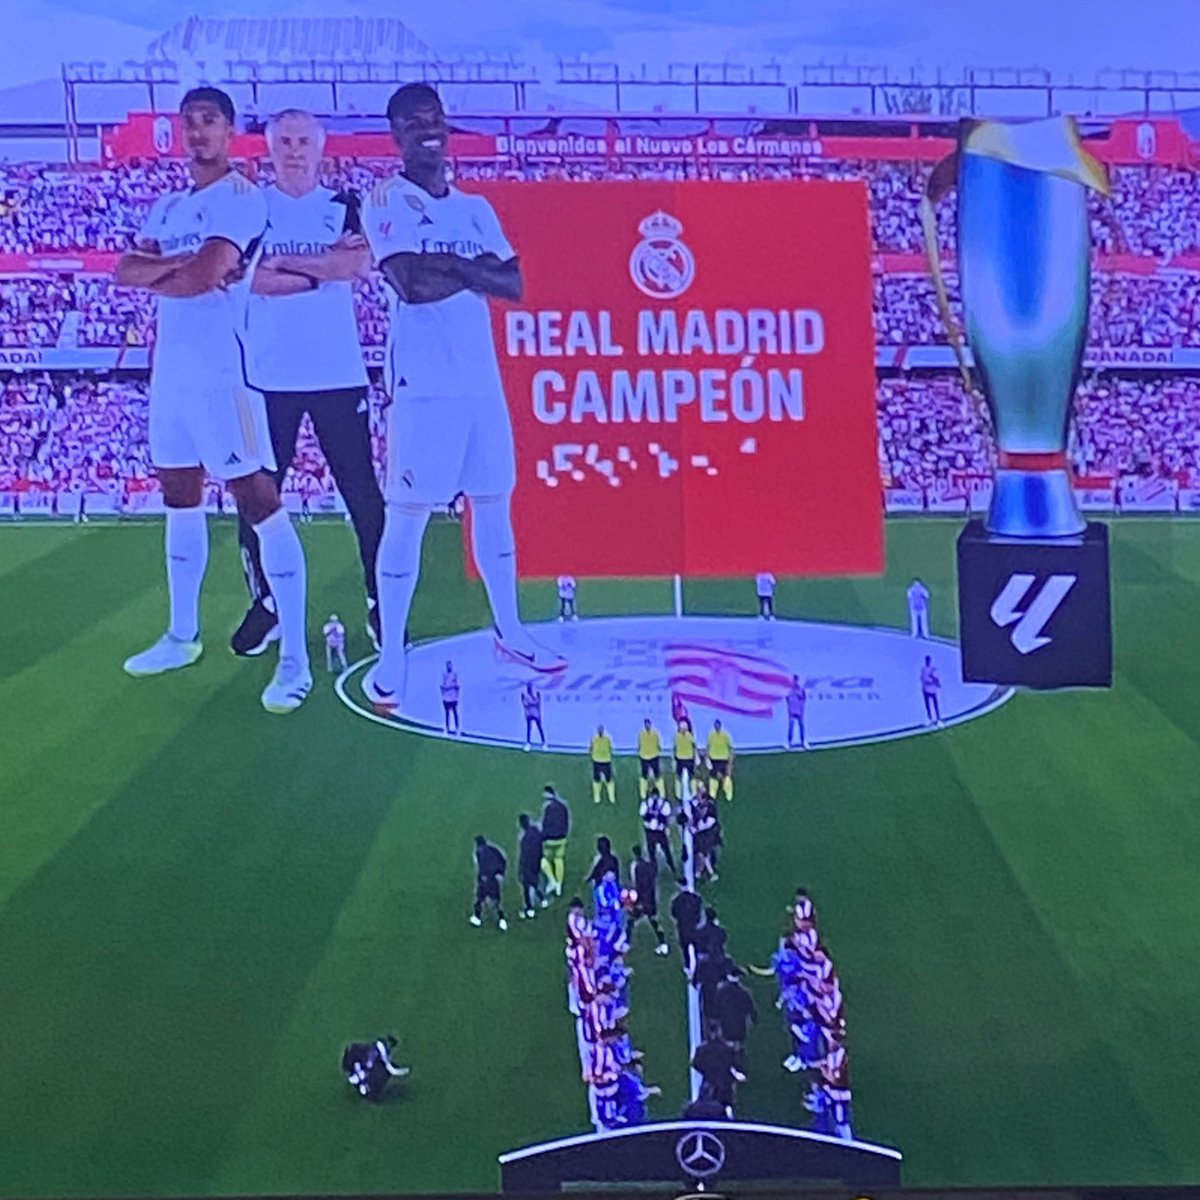 Deciding against receiving the Liga trophy out of respect because we’re playing Granada who are facing relegation. Yet Granada still gives us the guard of honor. It’s small details like this why I love Real Madrid that much more. Respect is earned, not given.